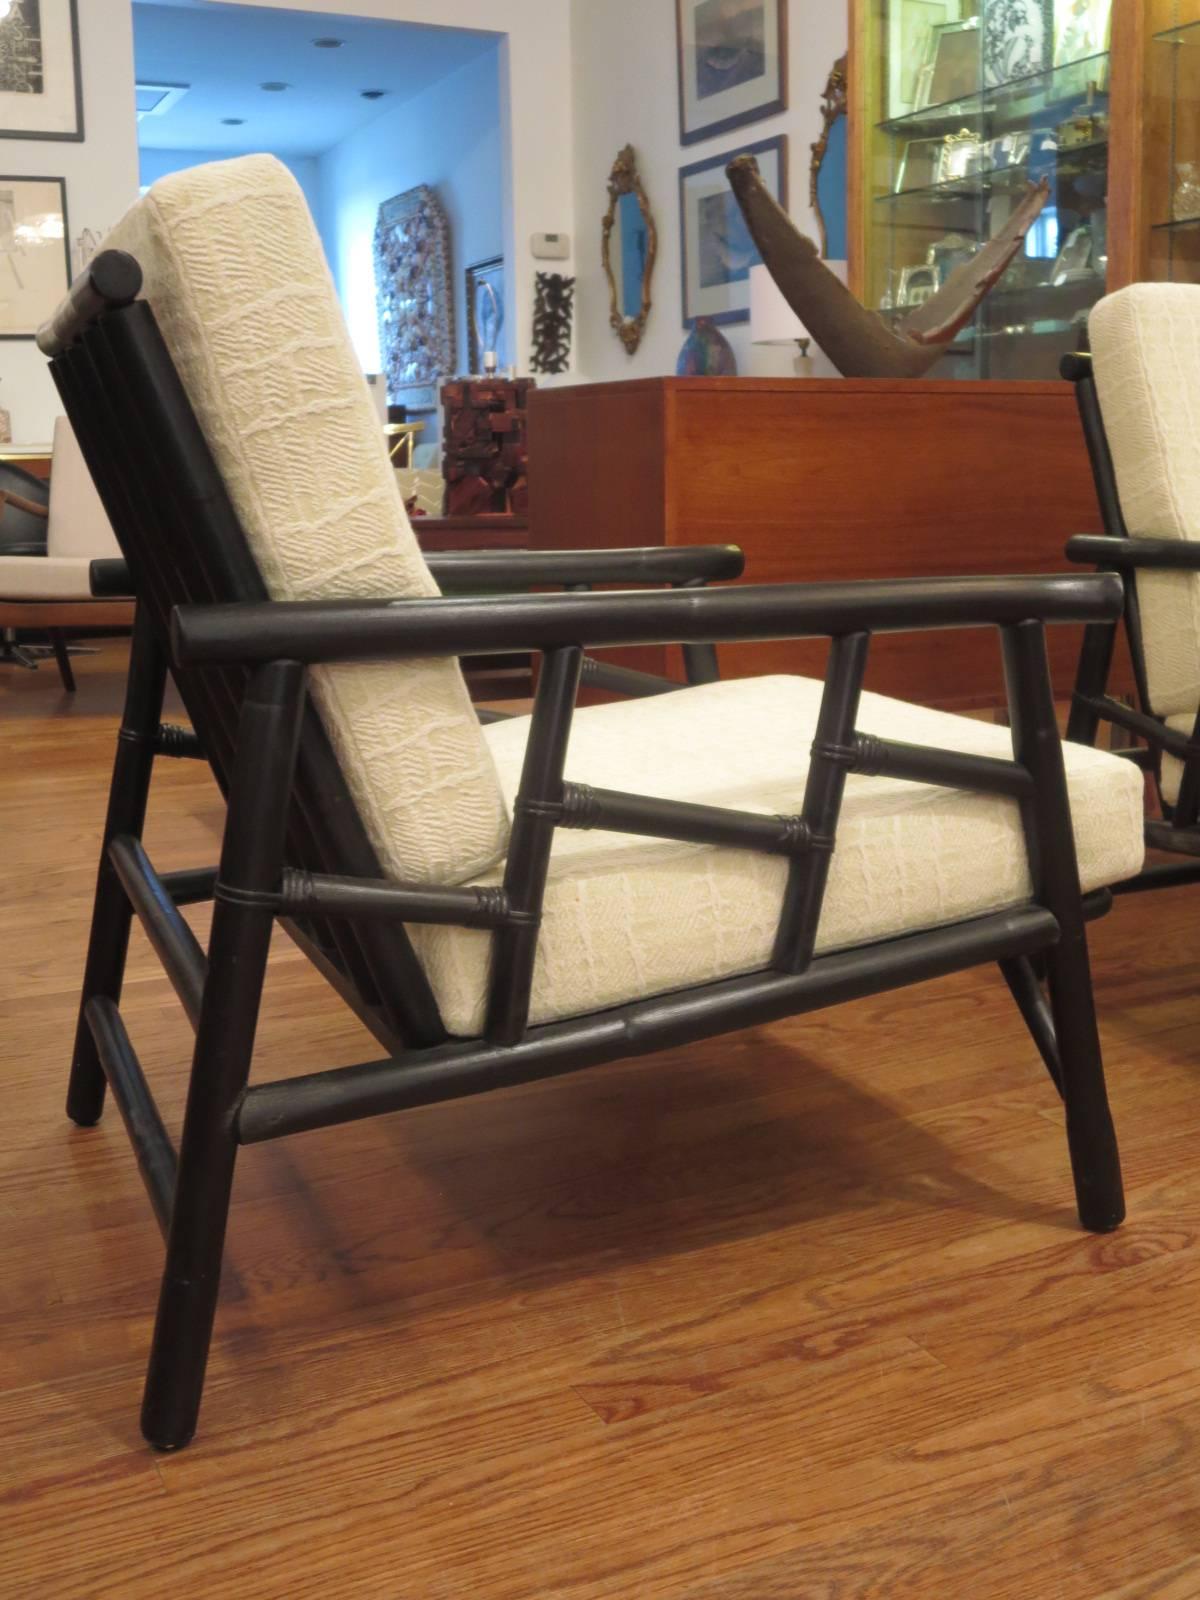 Black lacquered bamboo lounge chairs with new upholstery.
Settee also available.